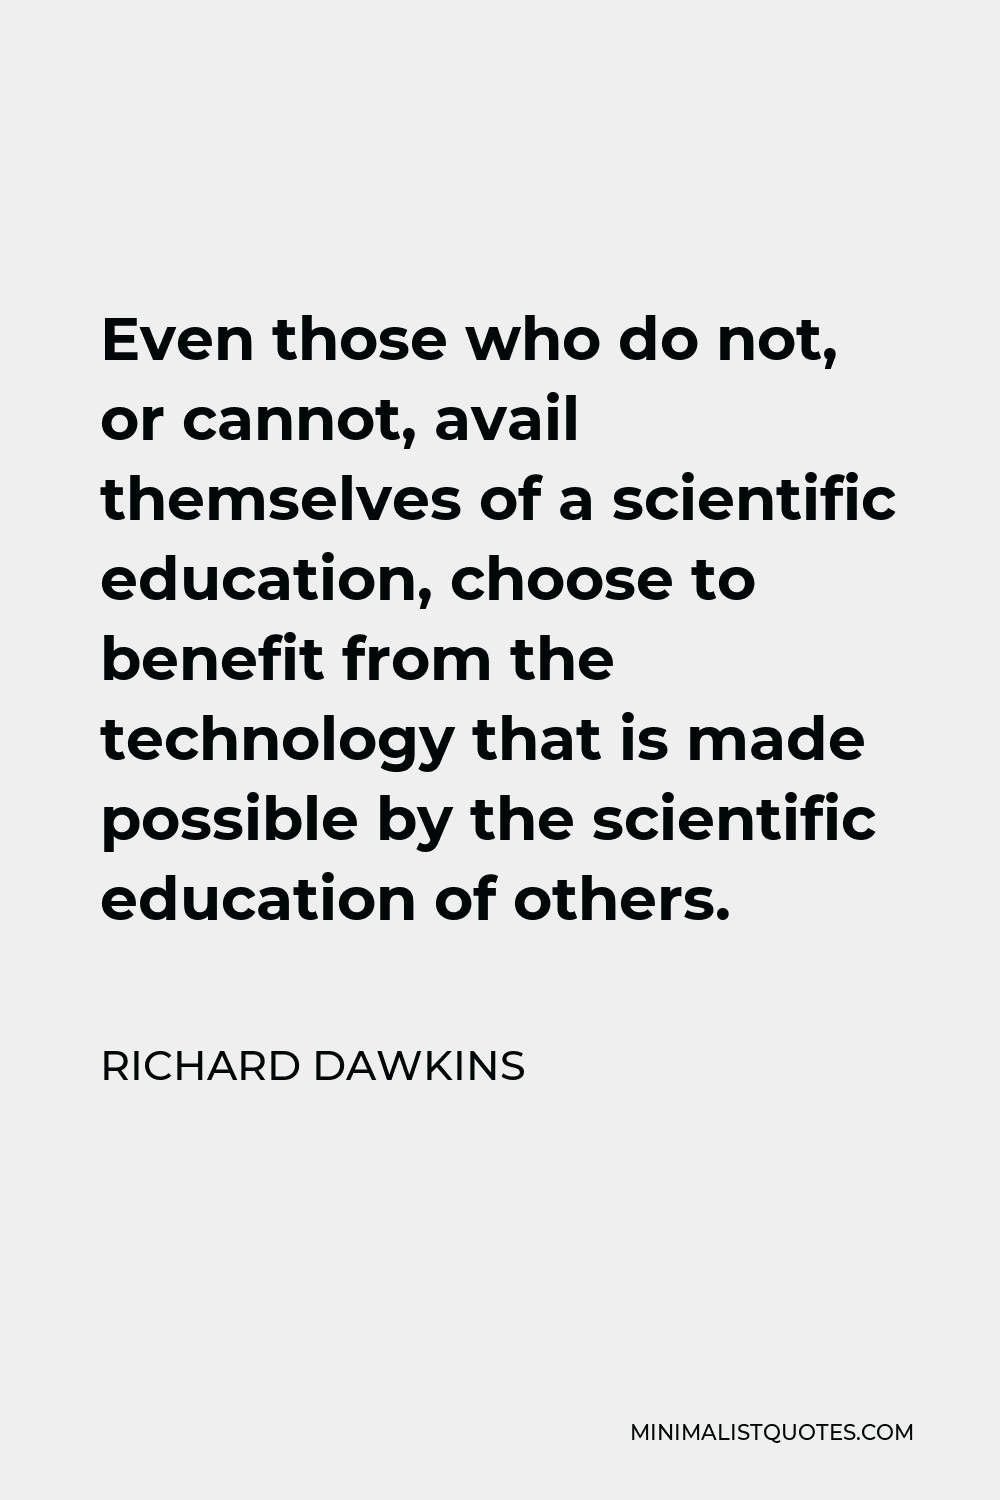 Richard Dawkins Quote - Even those who do not, or cannot, avail themselves of a scientific education, choose to benefit from the technology that is made possible by the scientific education of others.